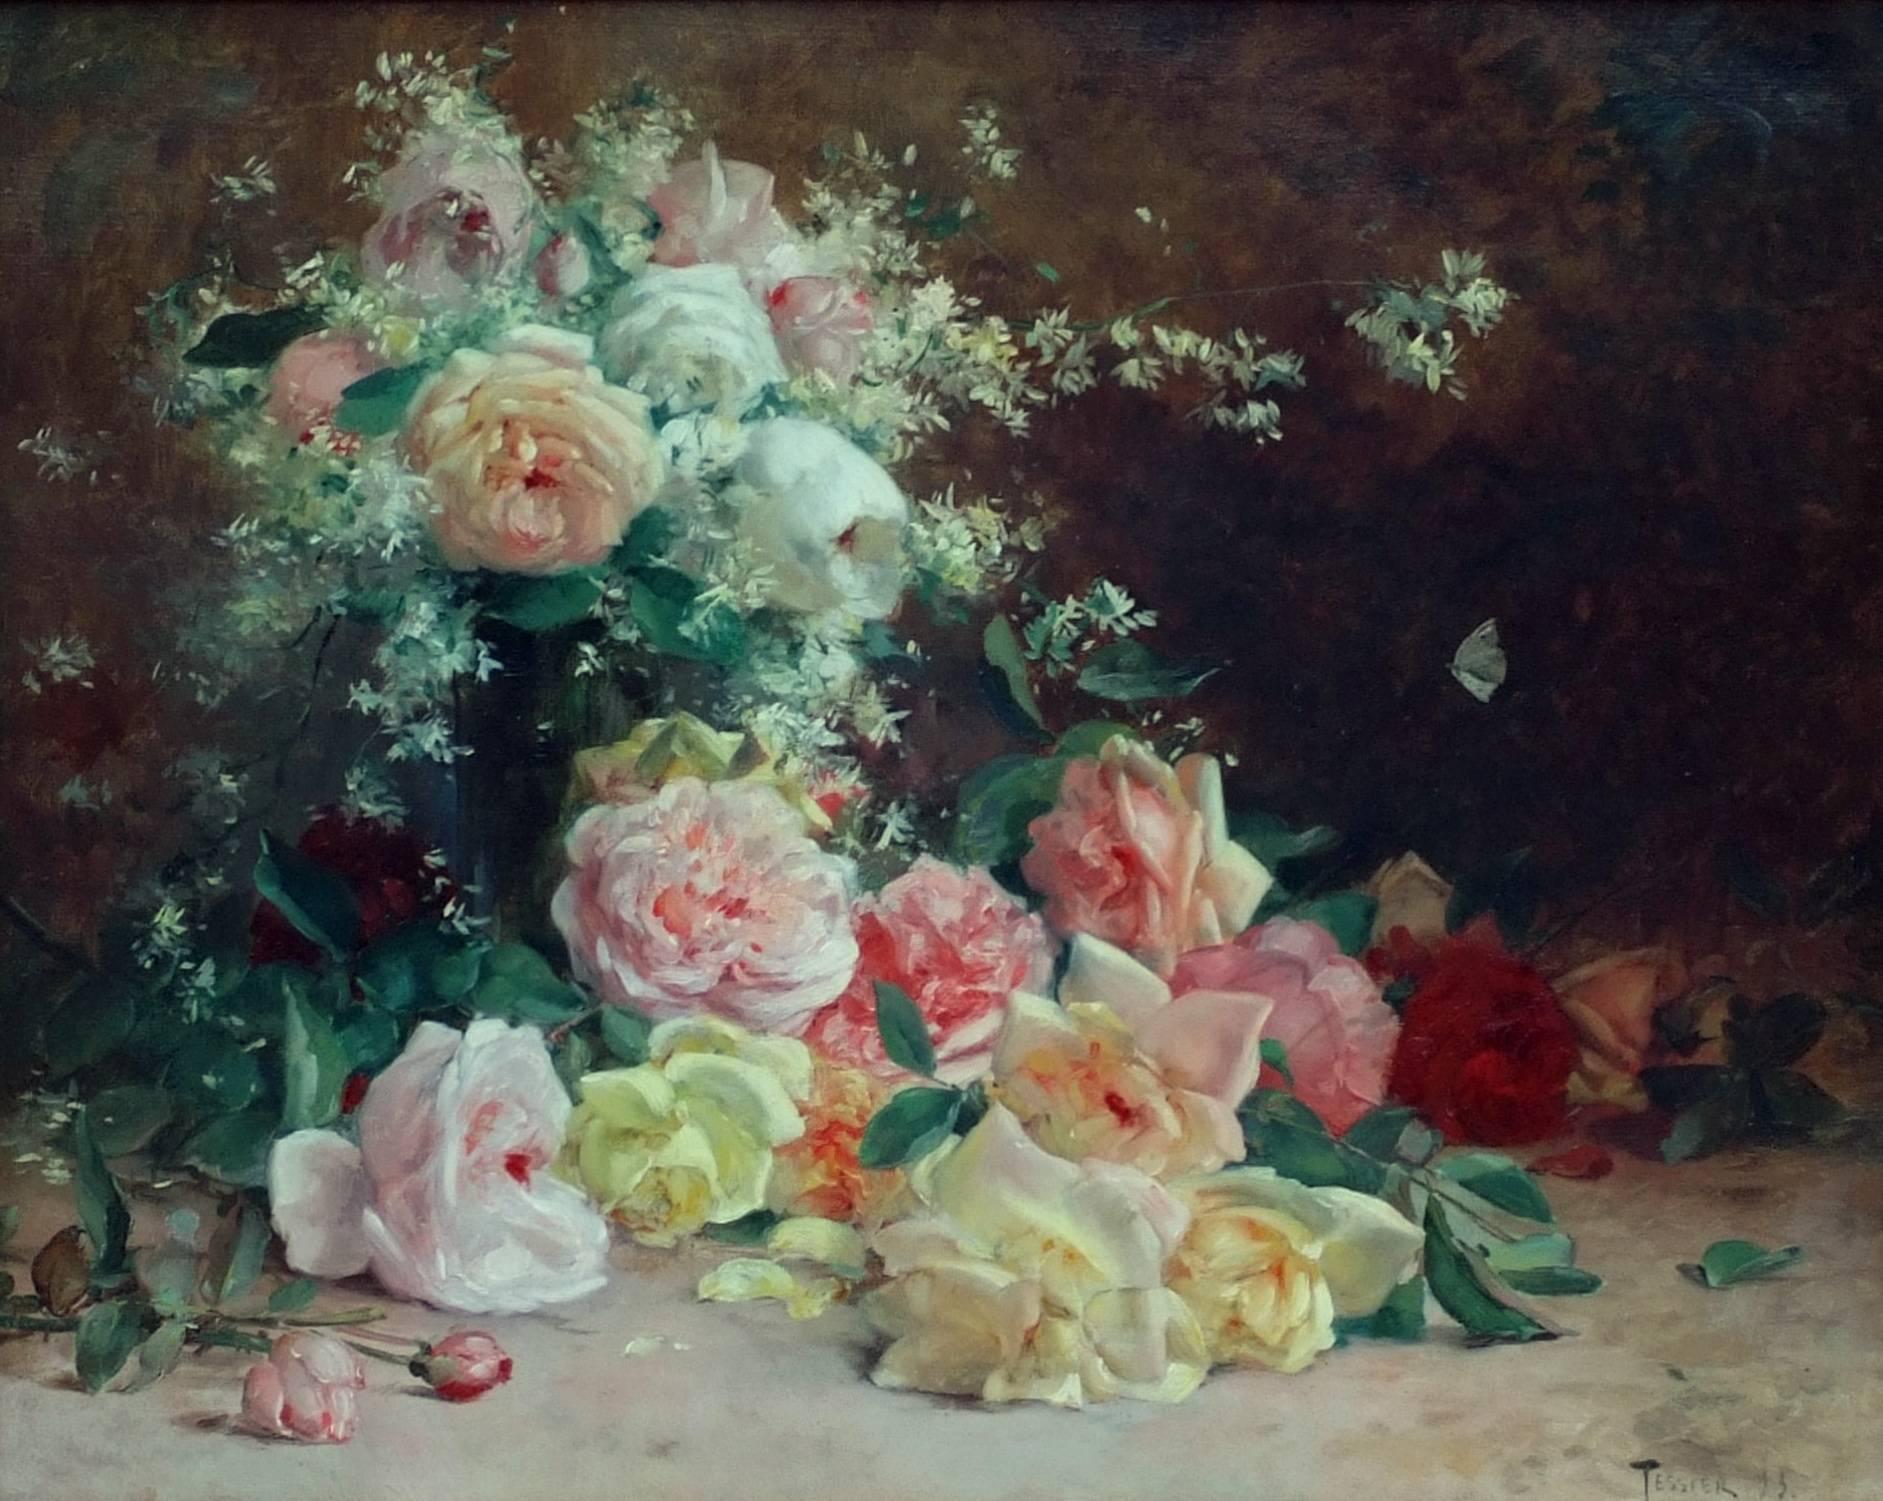 Painting 19th Century Flowers - Brown Still-Life Painting by Louis Adolphe Tessier